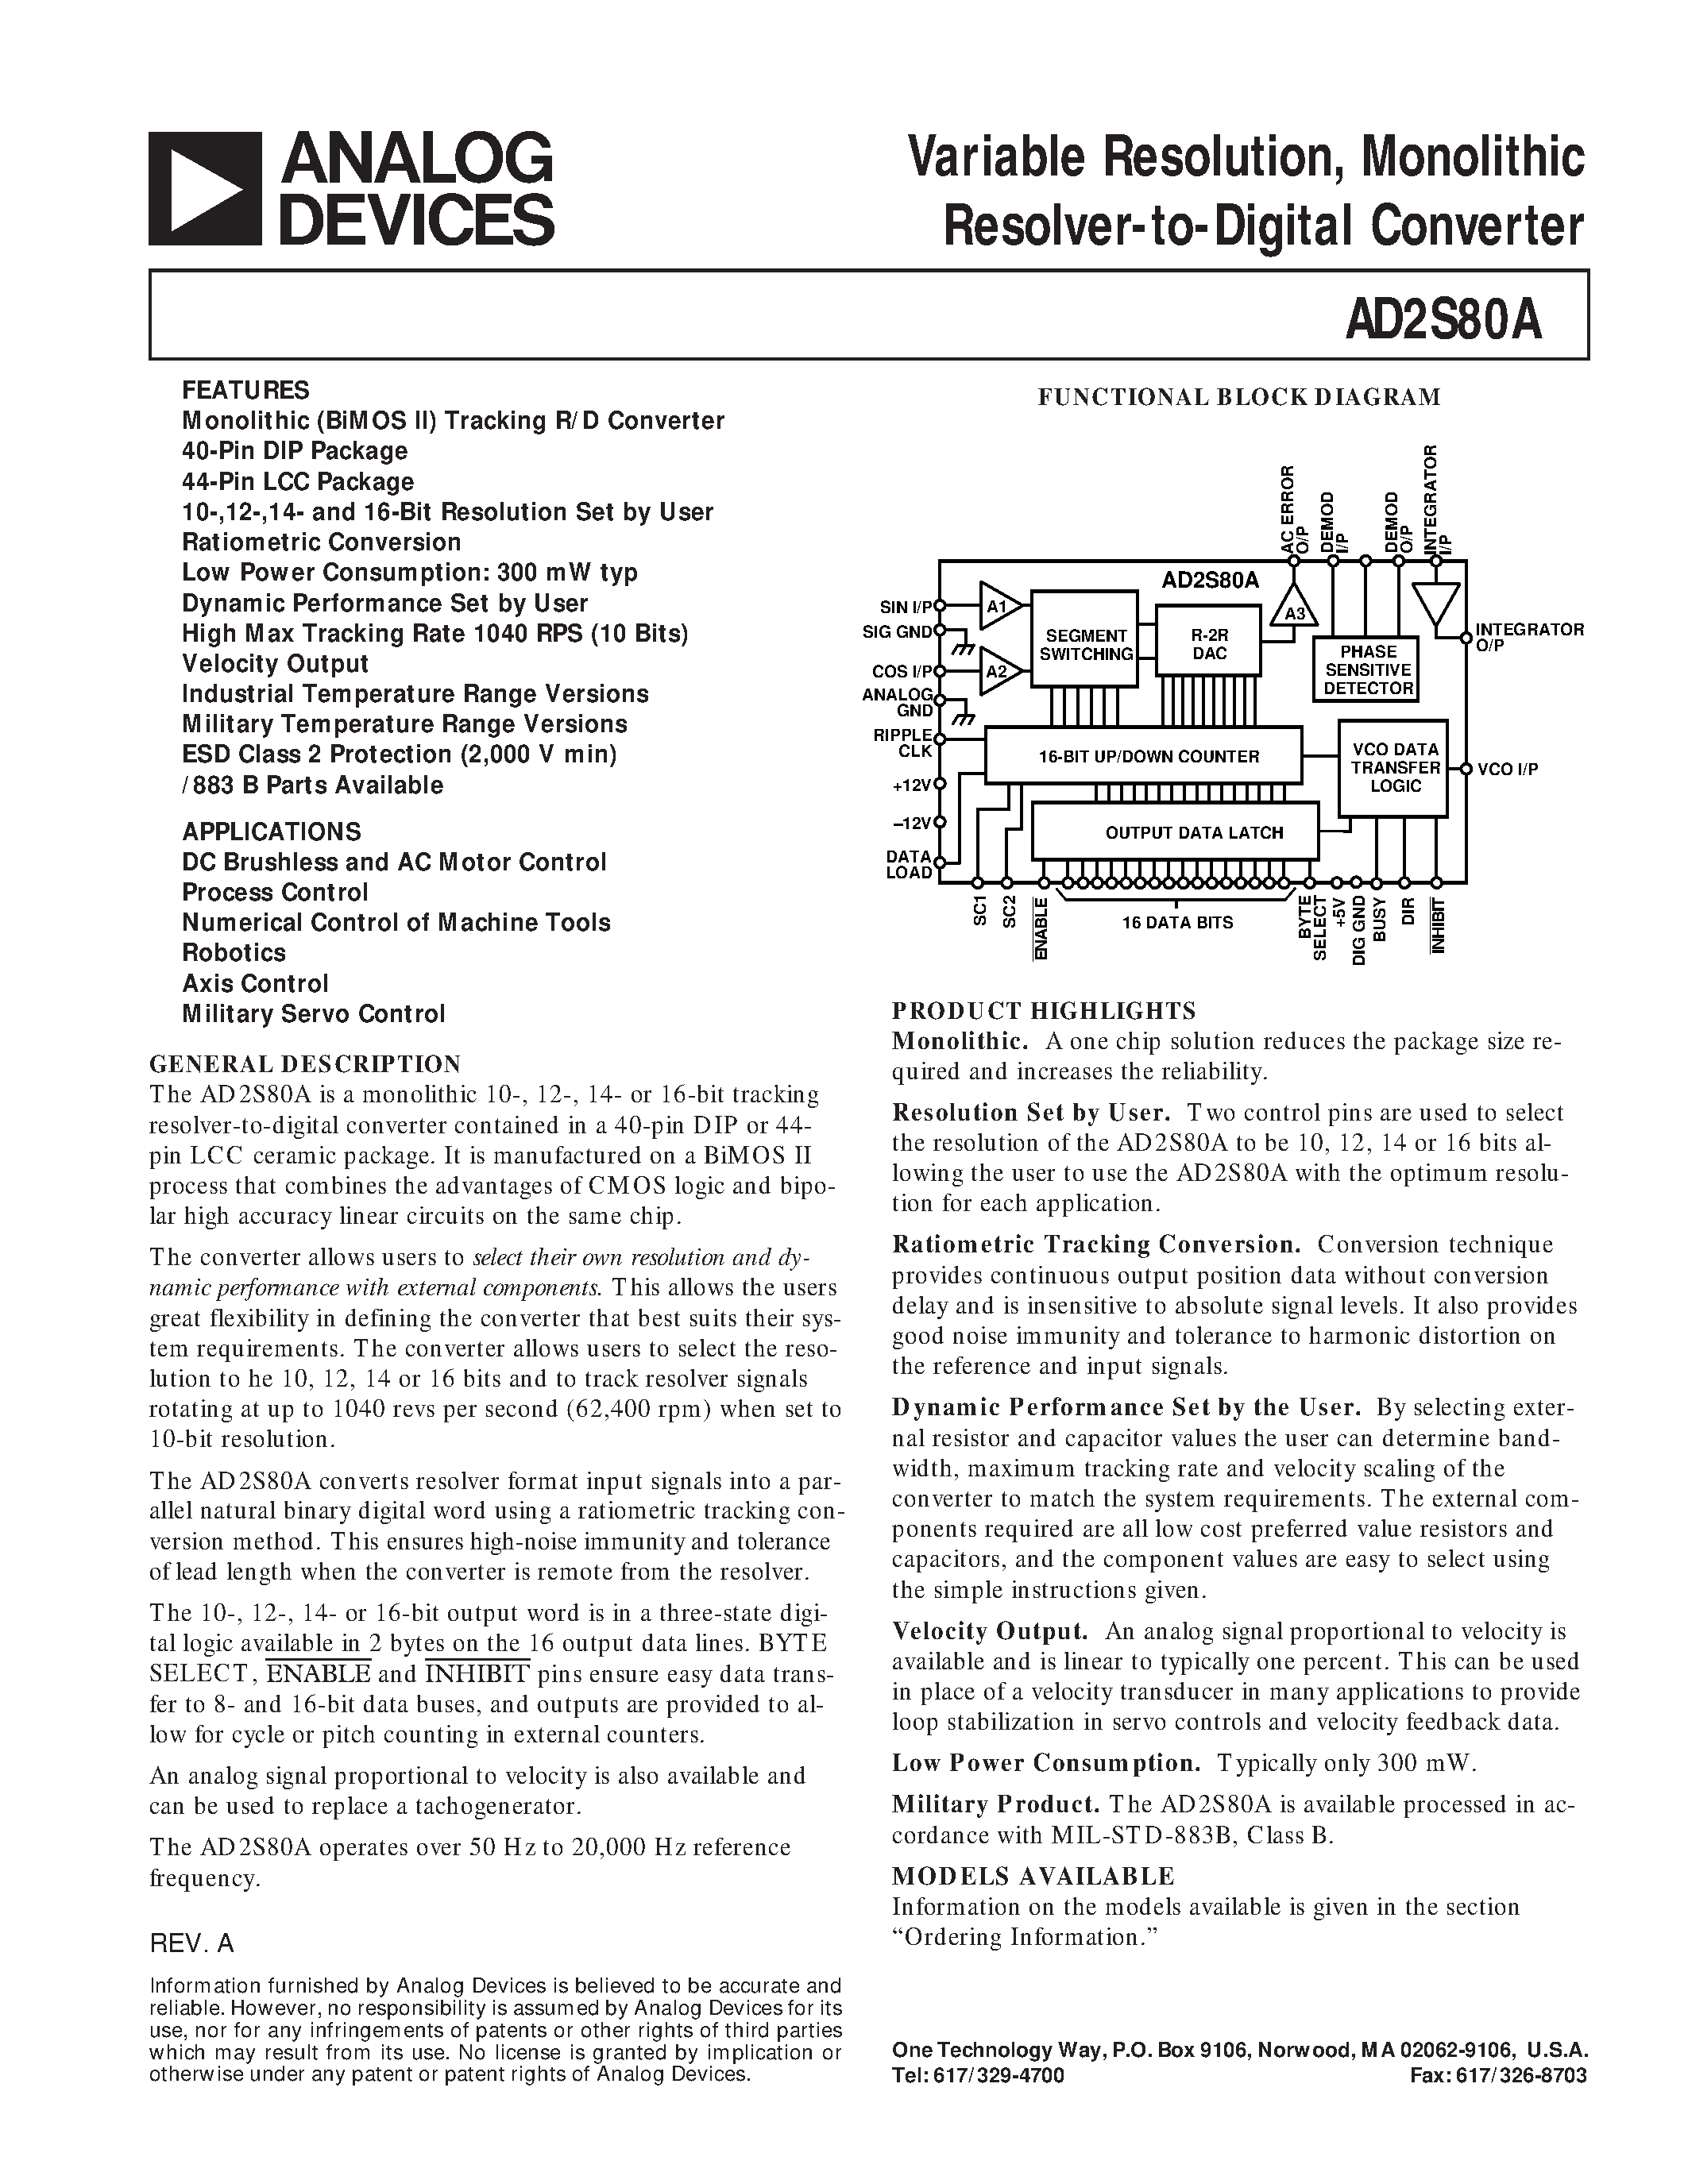 Datasheet AD2S80ATD/883B - Variable Resolution/ Monolithic Resolver-to-Digital Converter page 1